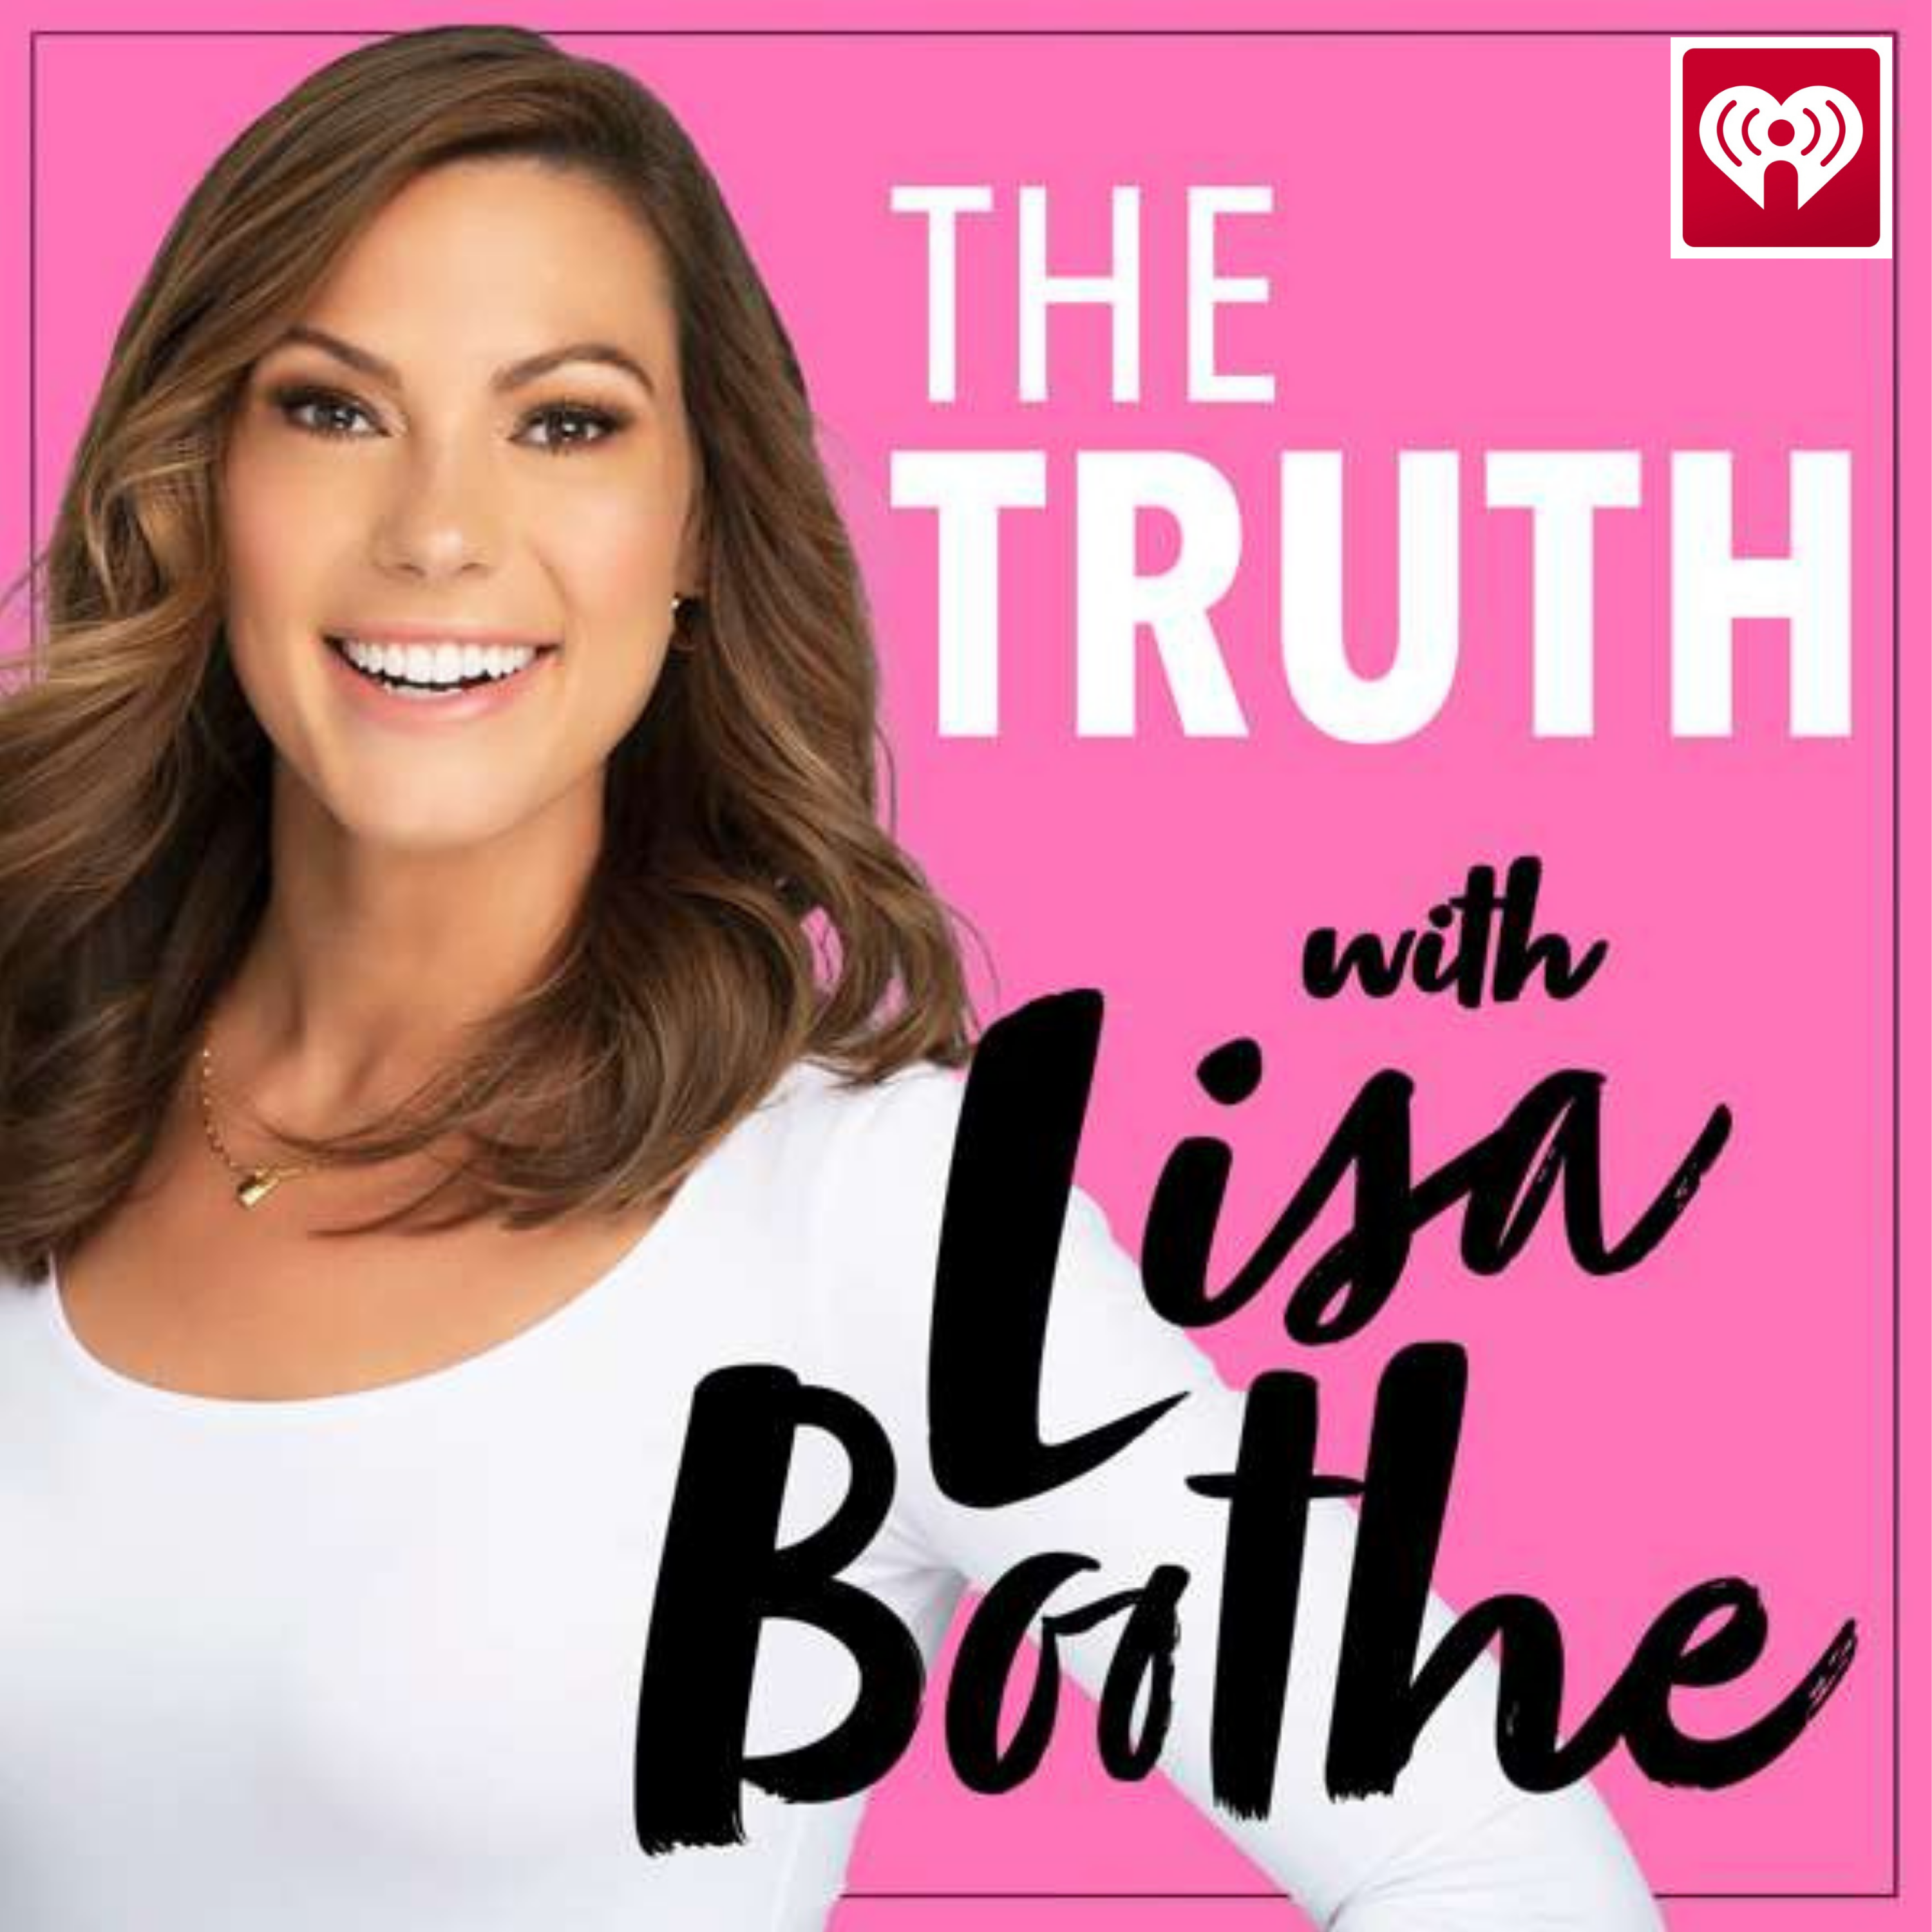 The Truth with Lisa Boothe: Winning Back Michigan with Tudor Dixon